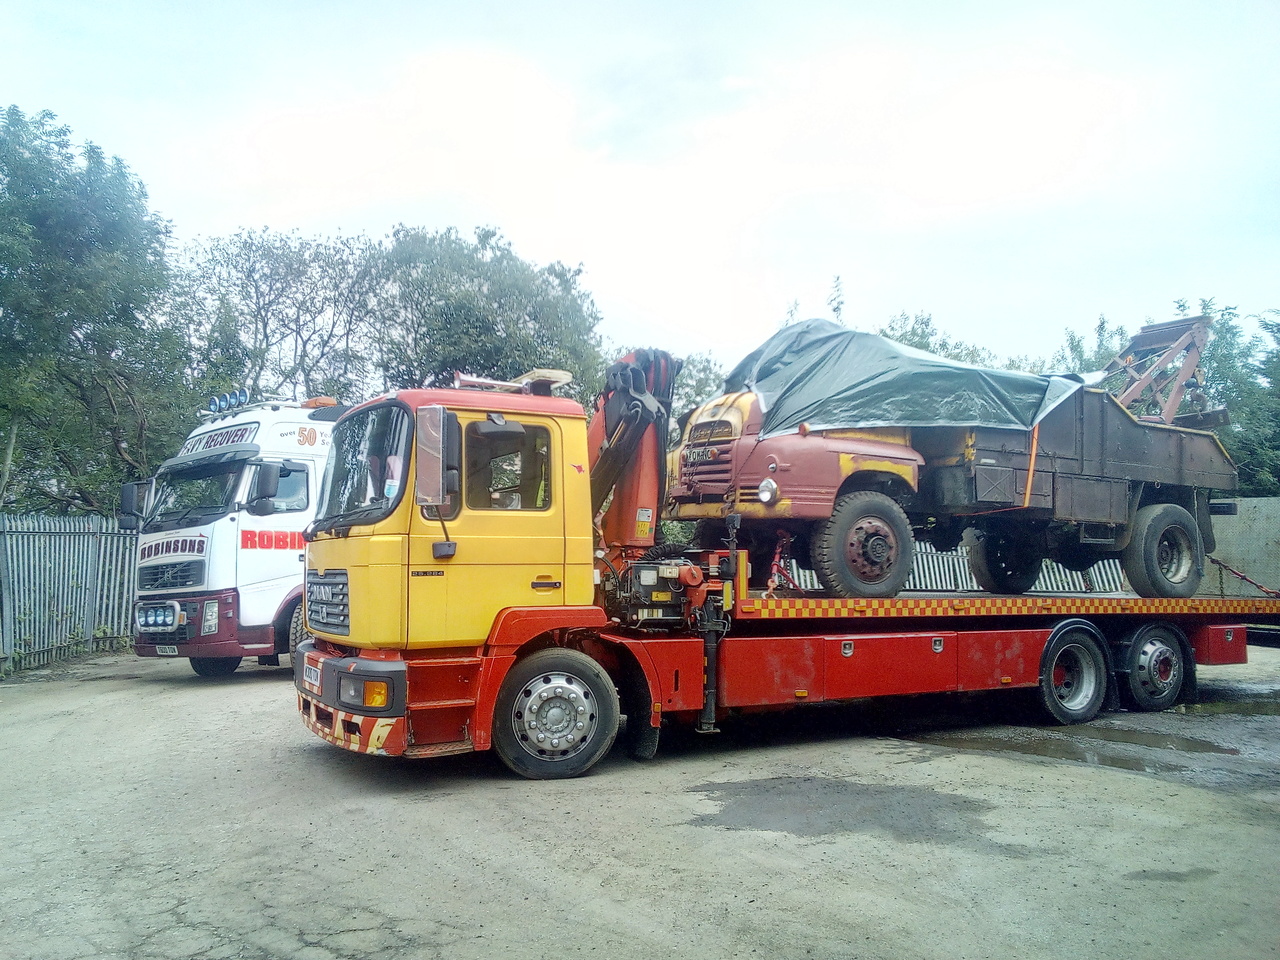 "Bedford chained down on the back of an MAN slide-bed recovery truck, with a Volvo FH wrecker waiting in the background"